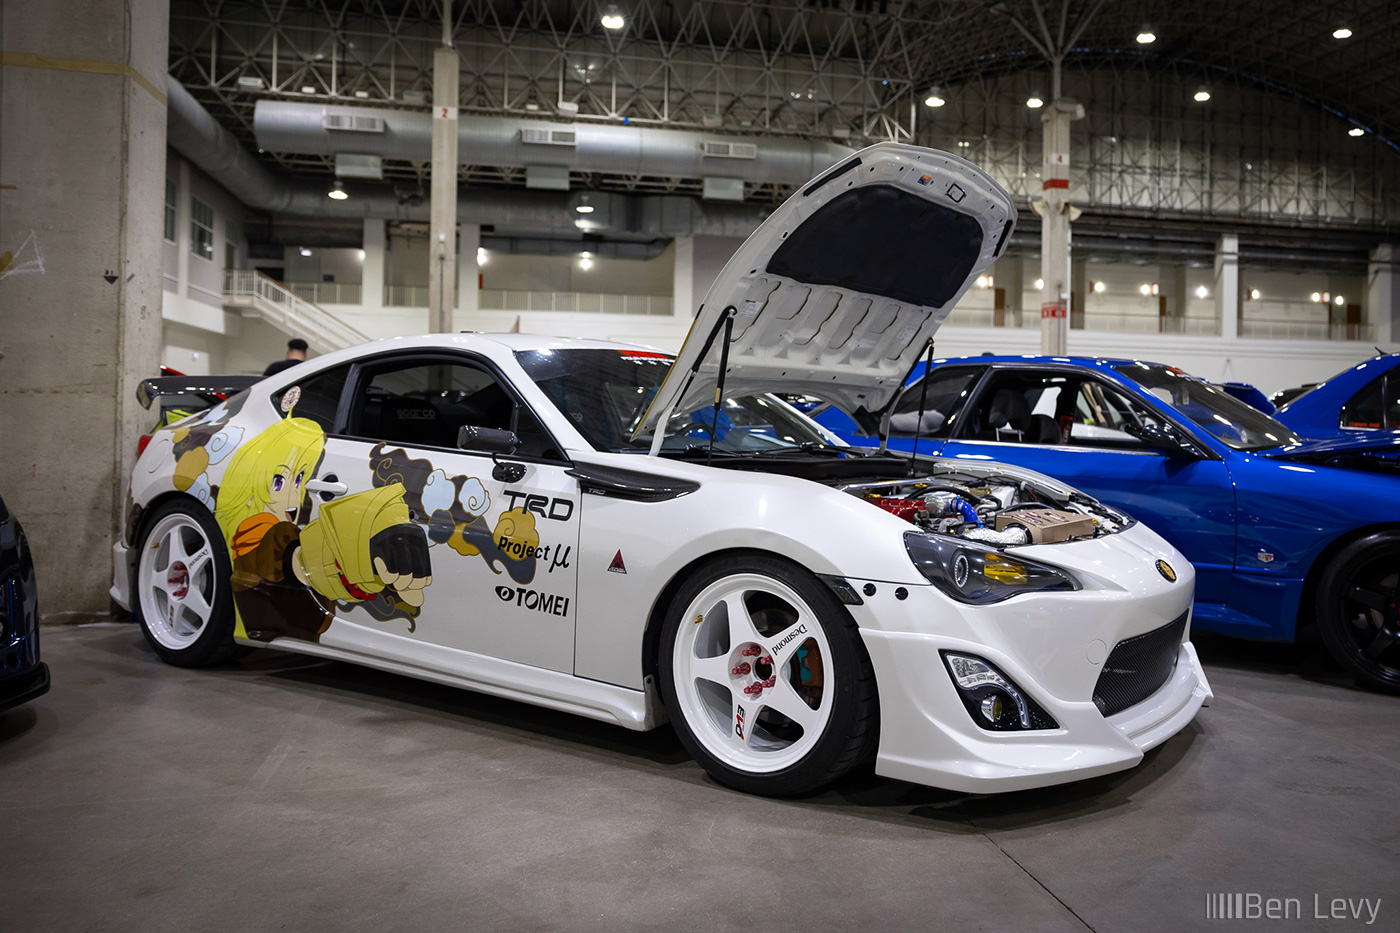 White Scion FR-S with Itasha Graphics at Wekfest Chicago